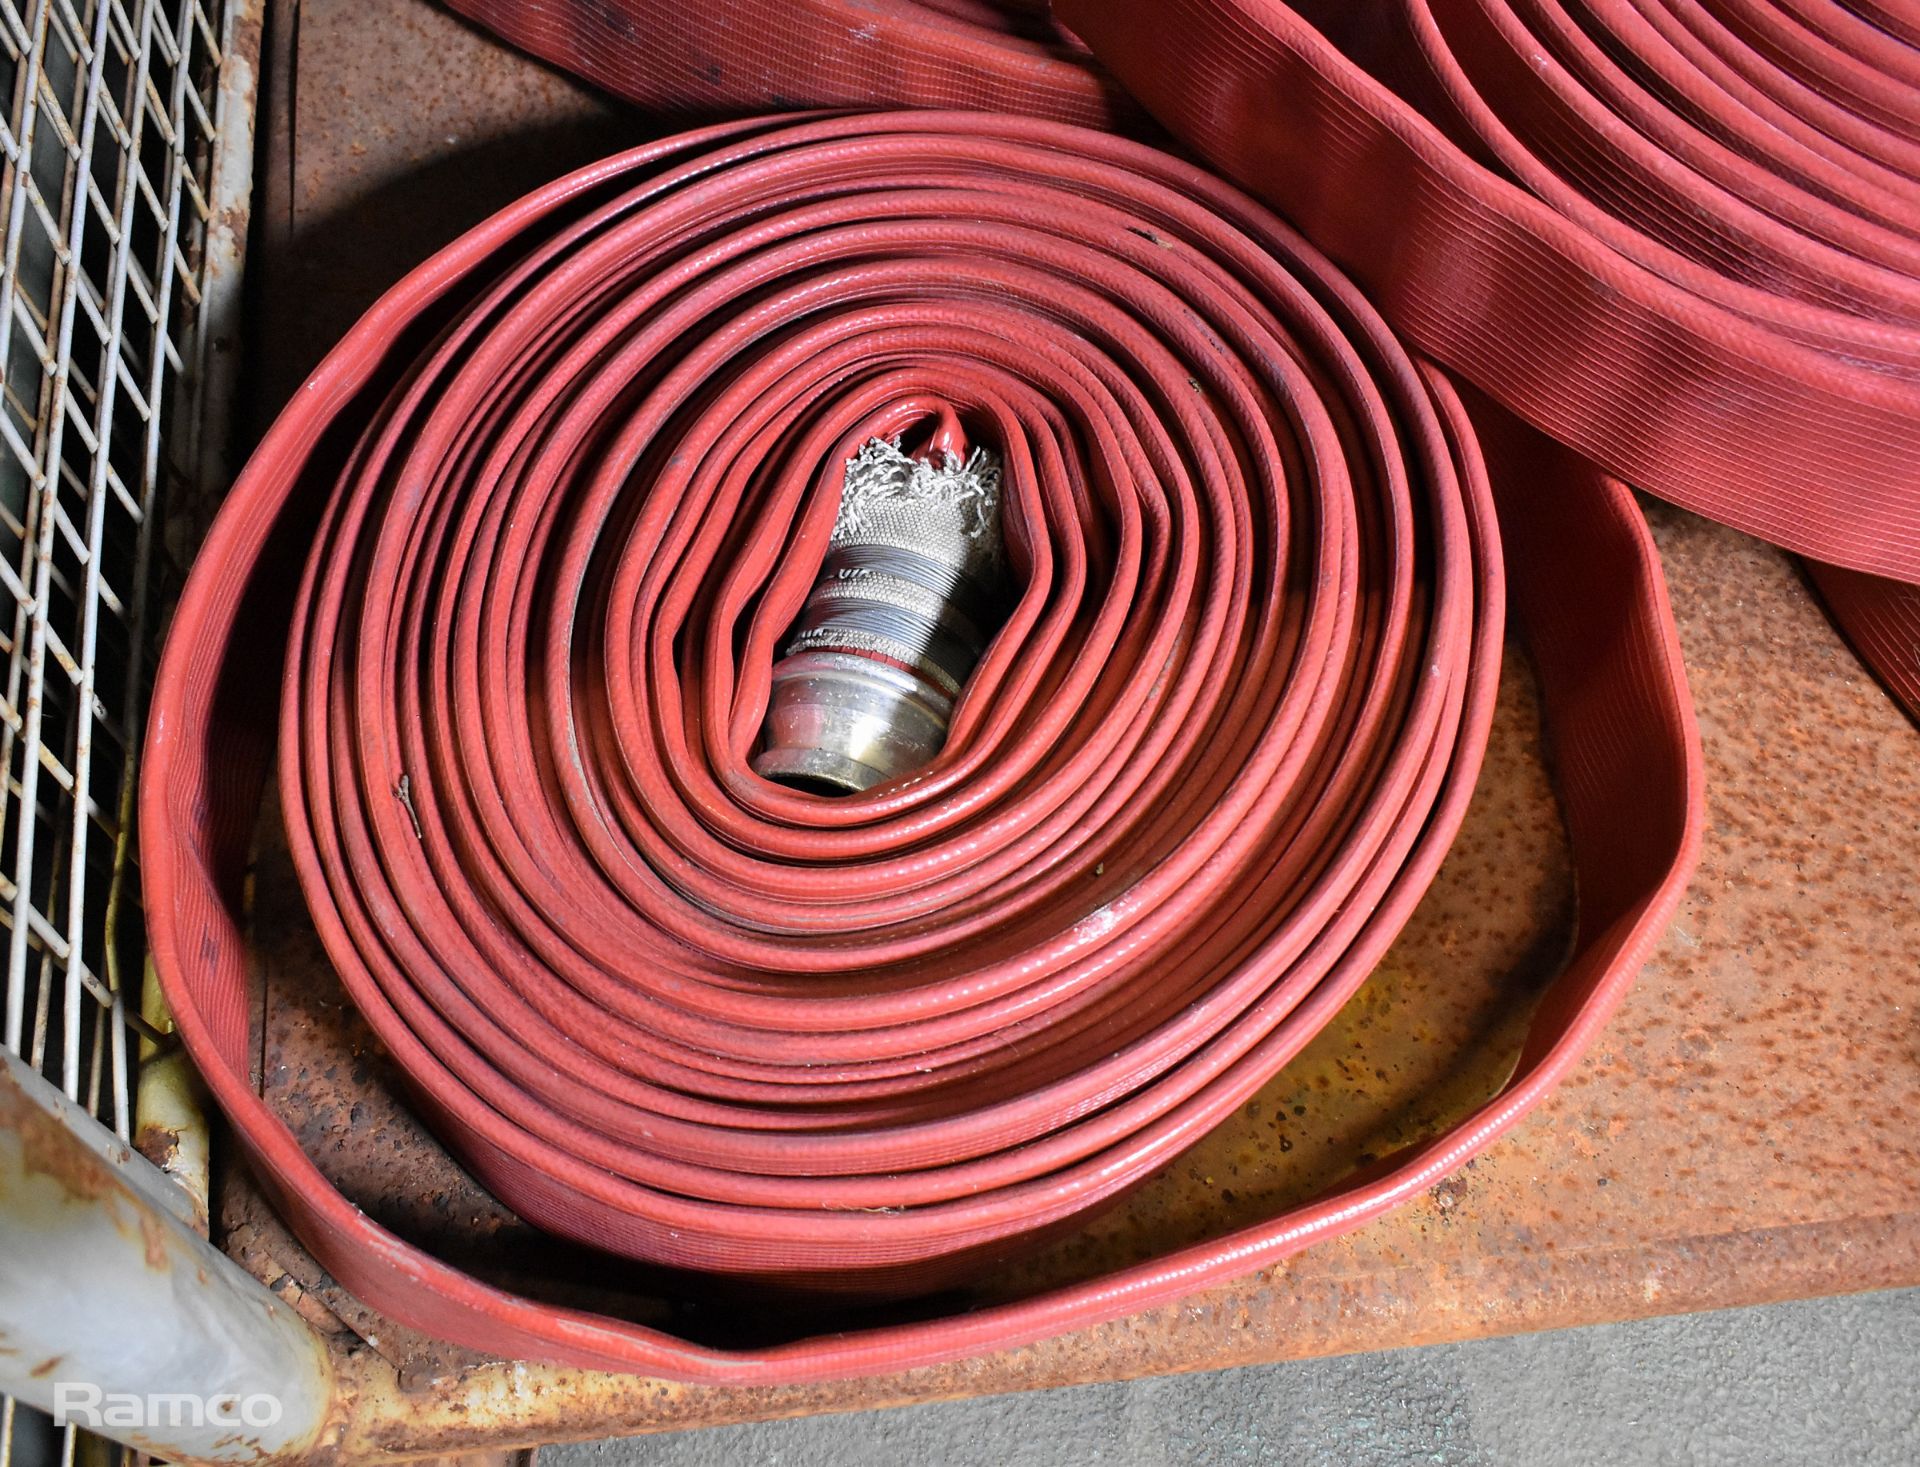 5x Layflat fire hoses - 70mm diameter - approx 20m length - Image 2 of 3